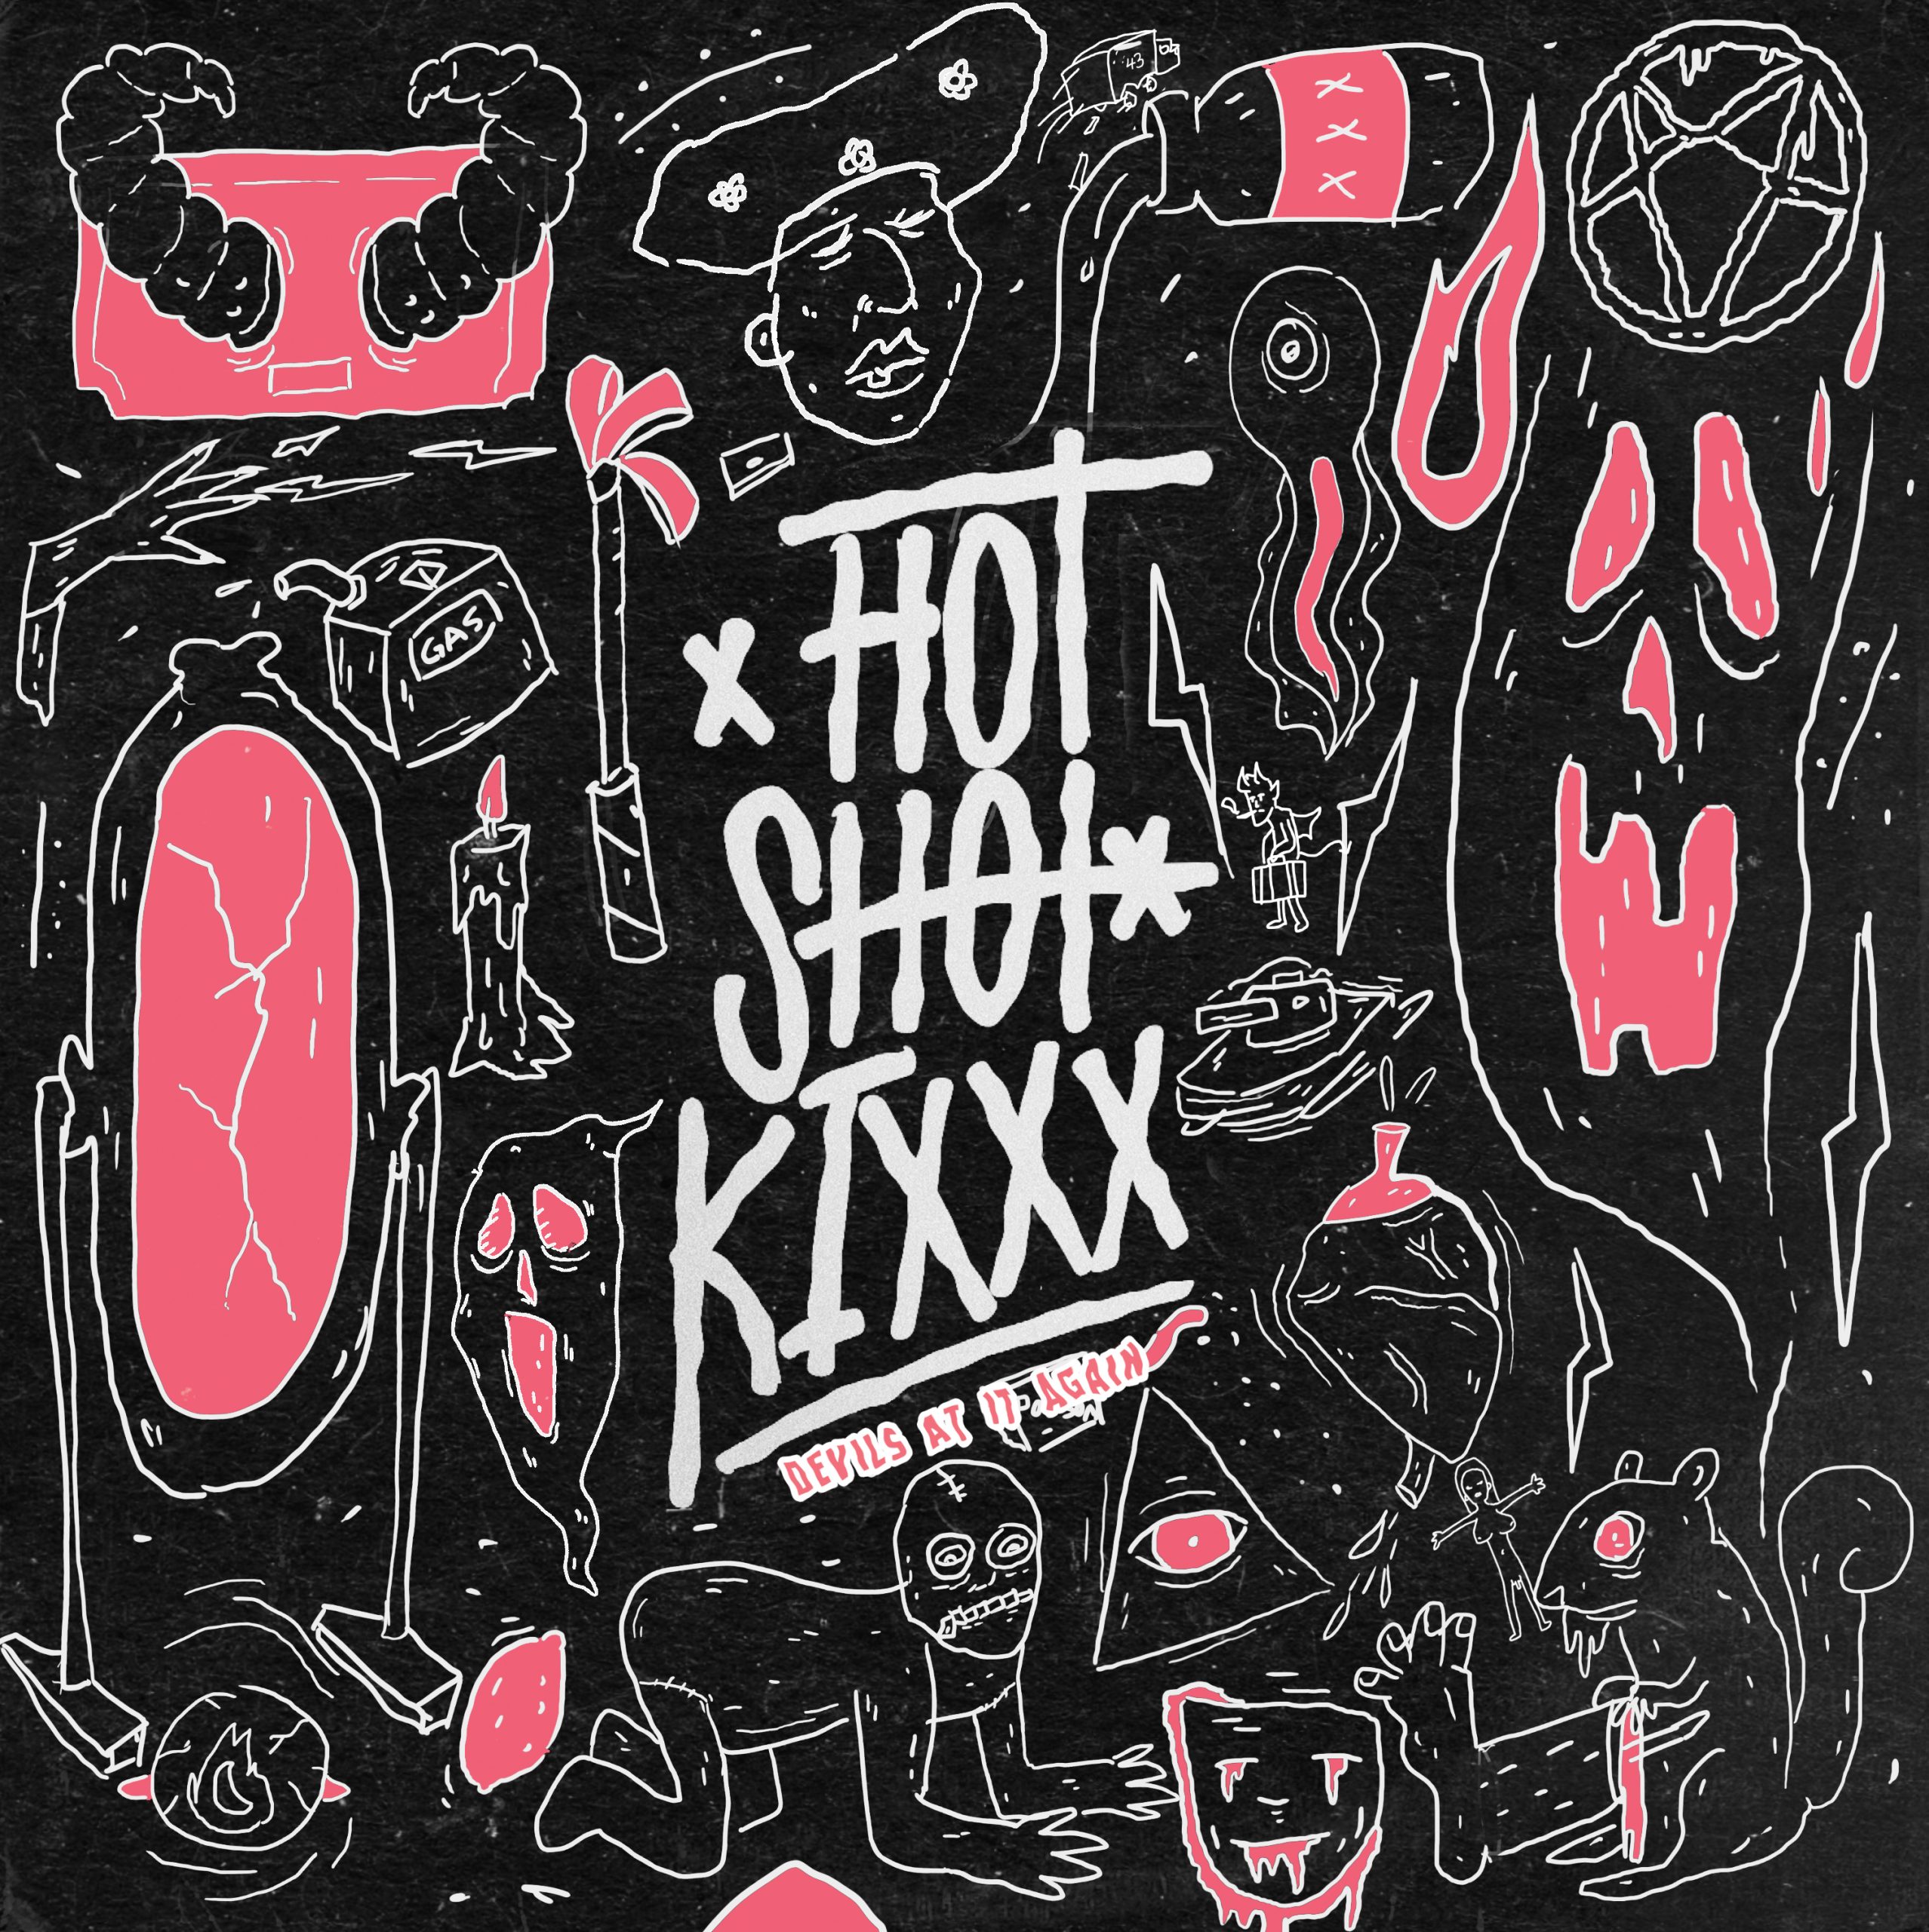 The Worst in Alternative Rock, Official Unrated Video Release of Witchcraft by Hot Shot Kixxx